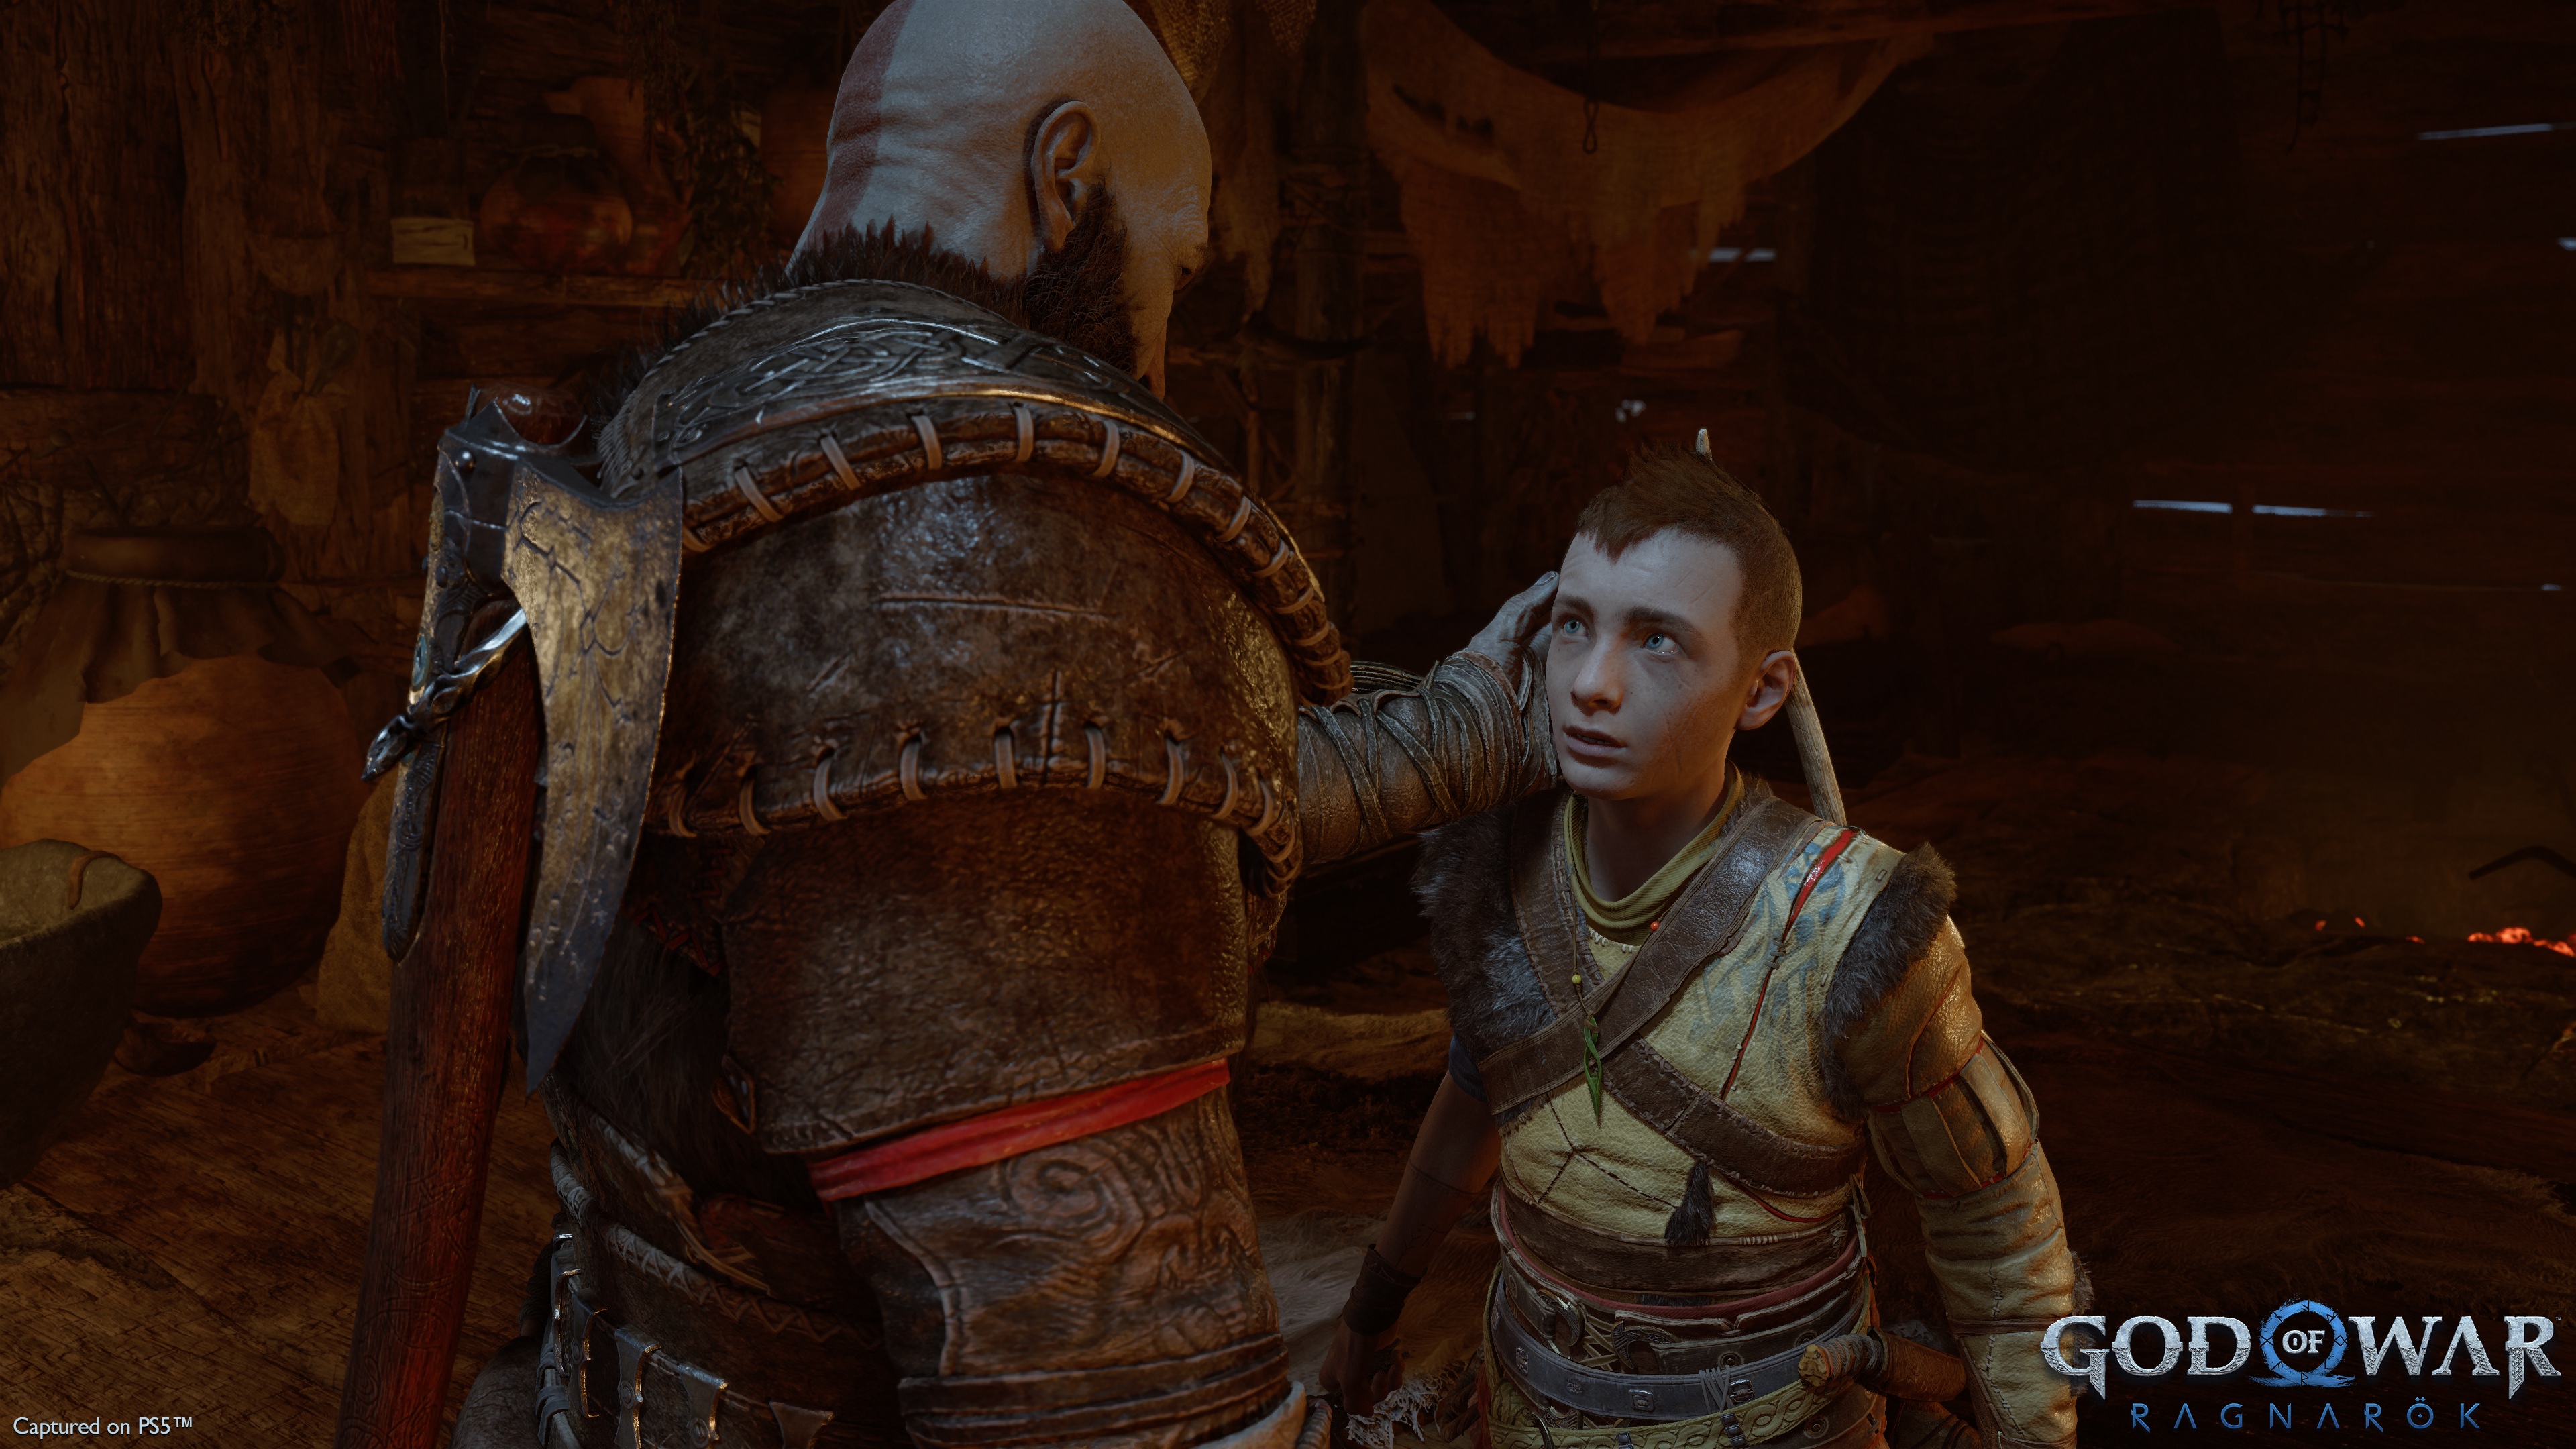 Kratos touches the side of Atreus’ head, who looks up at him, while the two are in their cabin, in a screenshot from God of War Ragnarok.